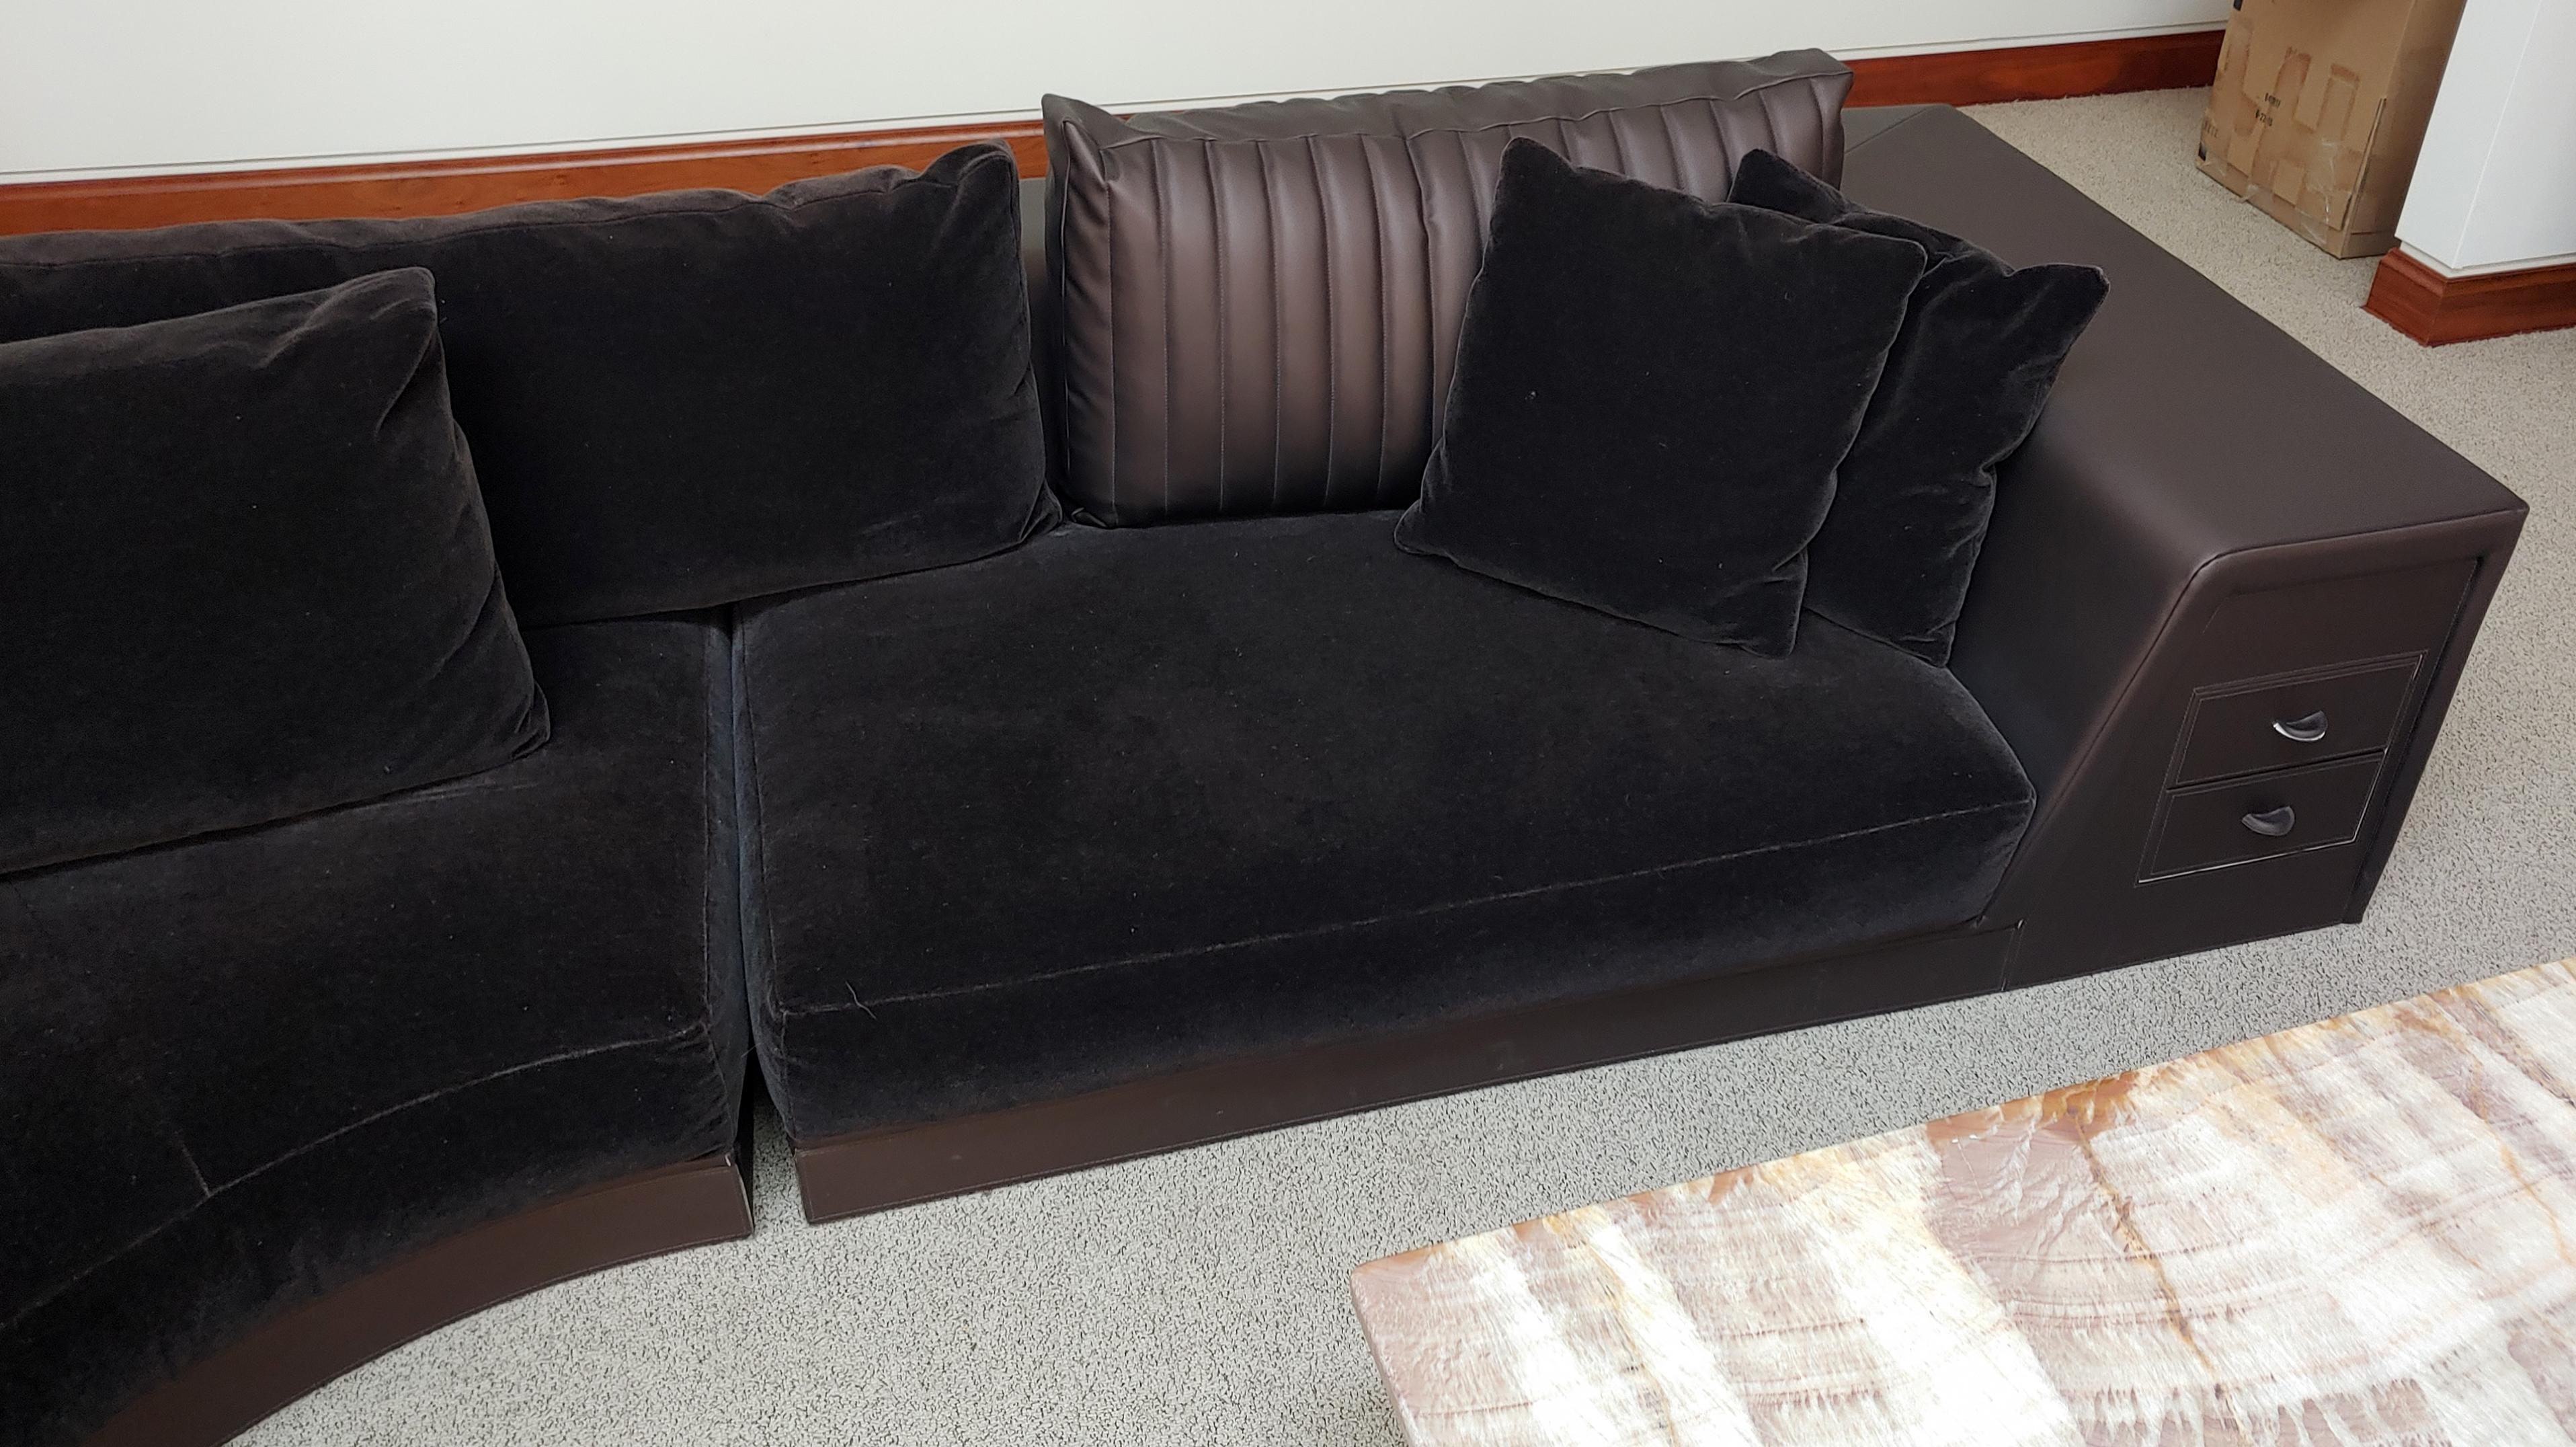 For your consideration is a comfortable and stylish, brown velver, three-piece sectional sofa, made in Italy for Mariani, circa 1990s. In very good condition. The dimensions are 127